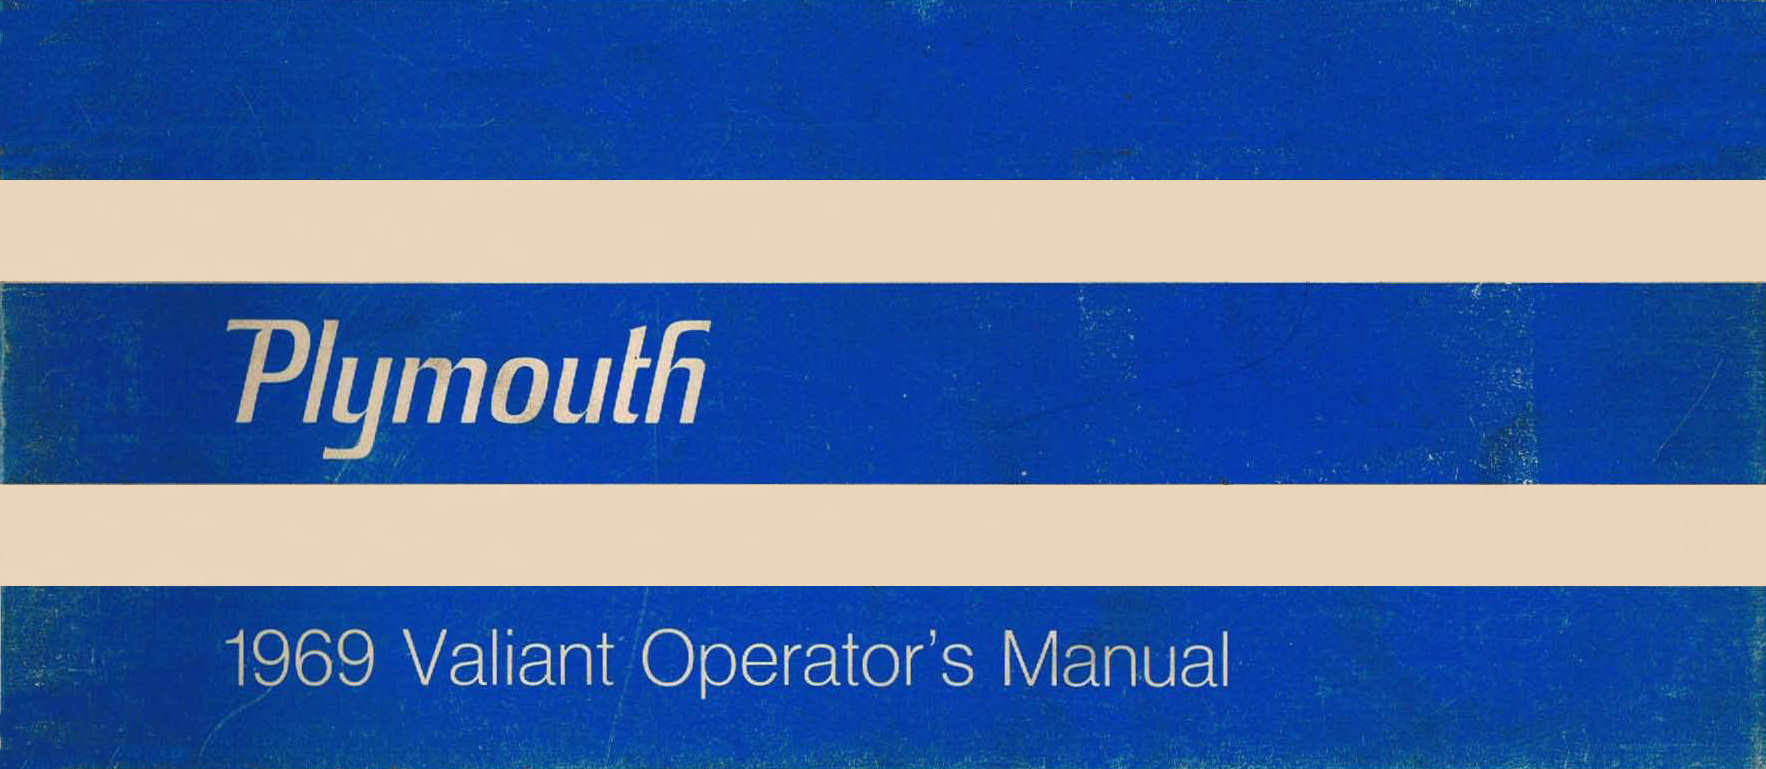 1969_Plymouth_Valiant_Owners_Manual-00